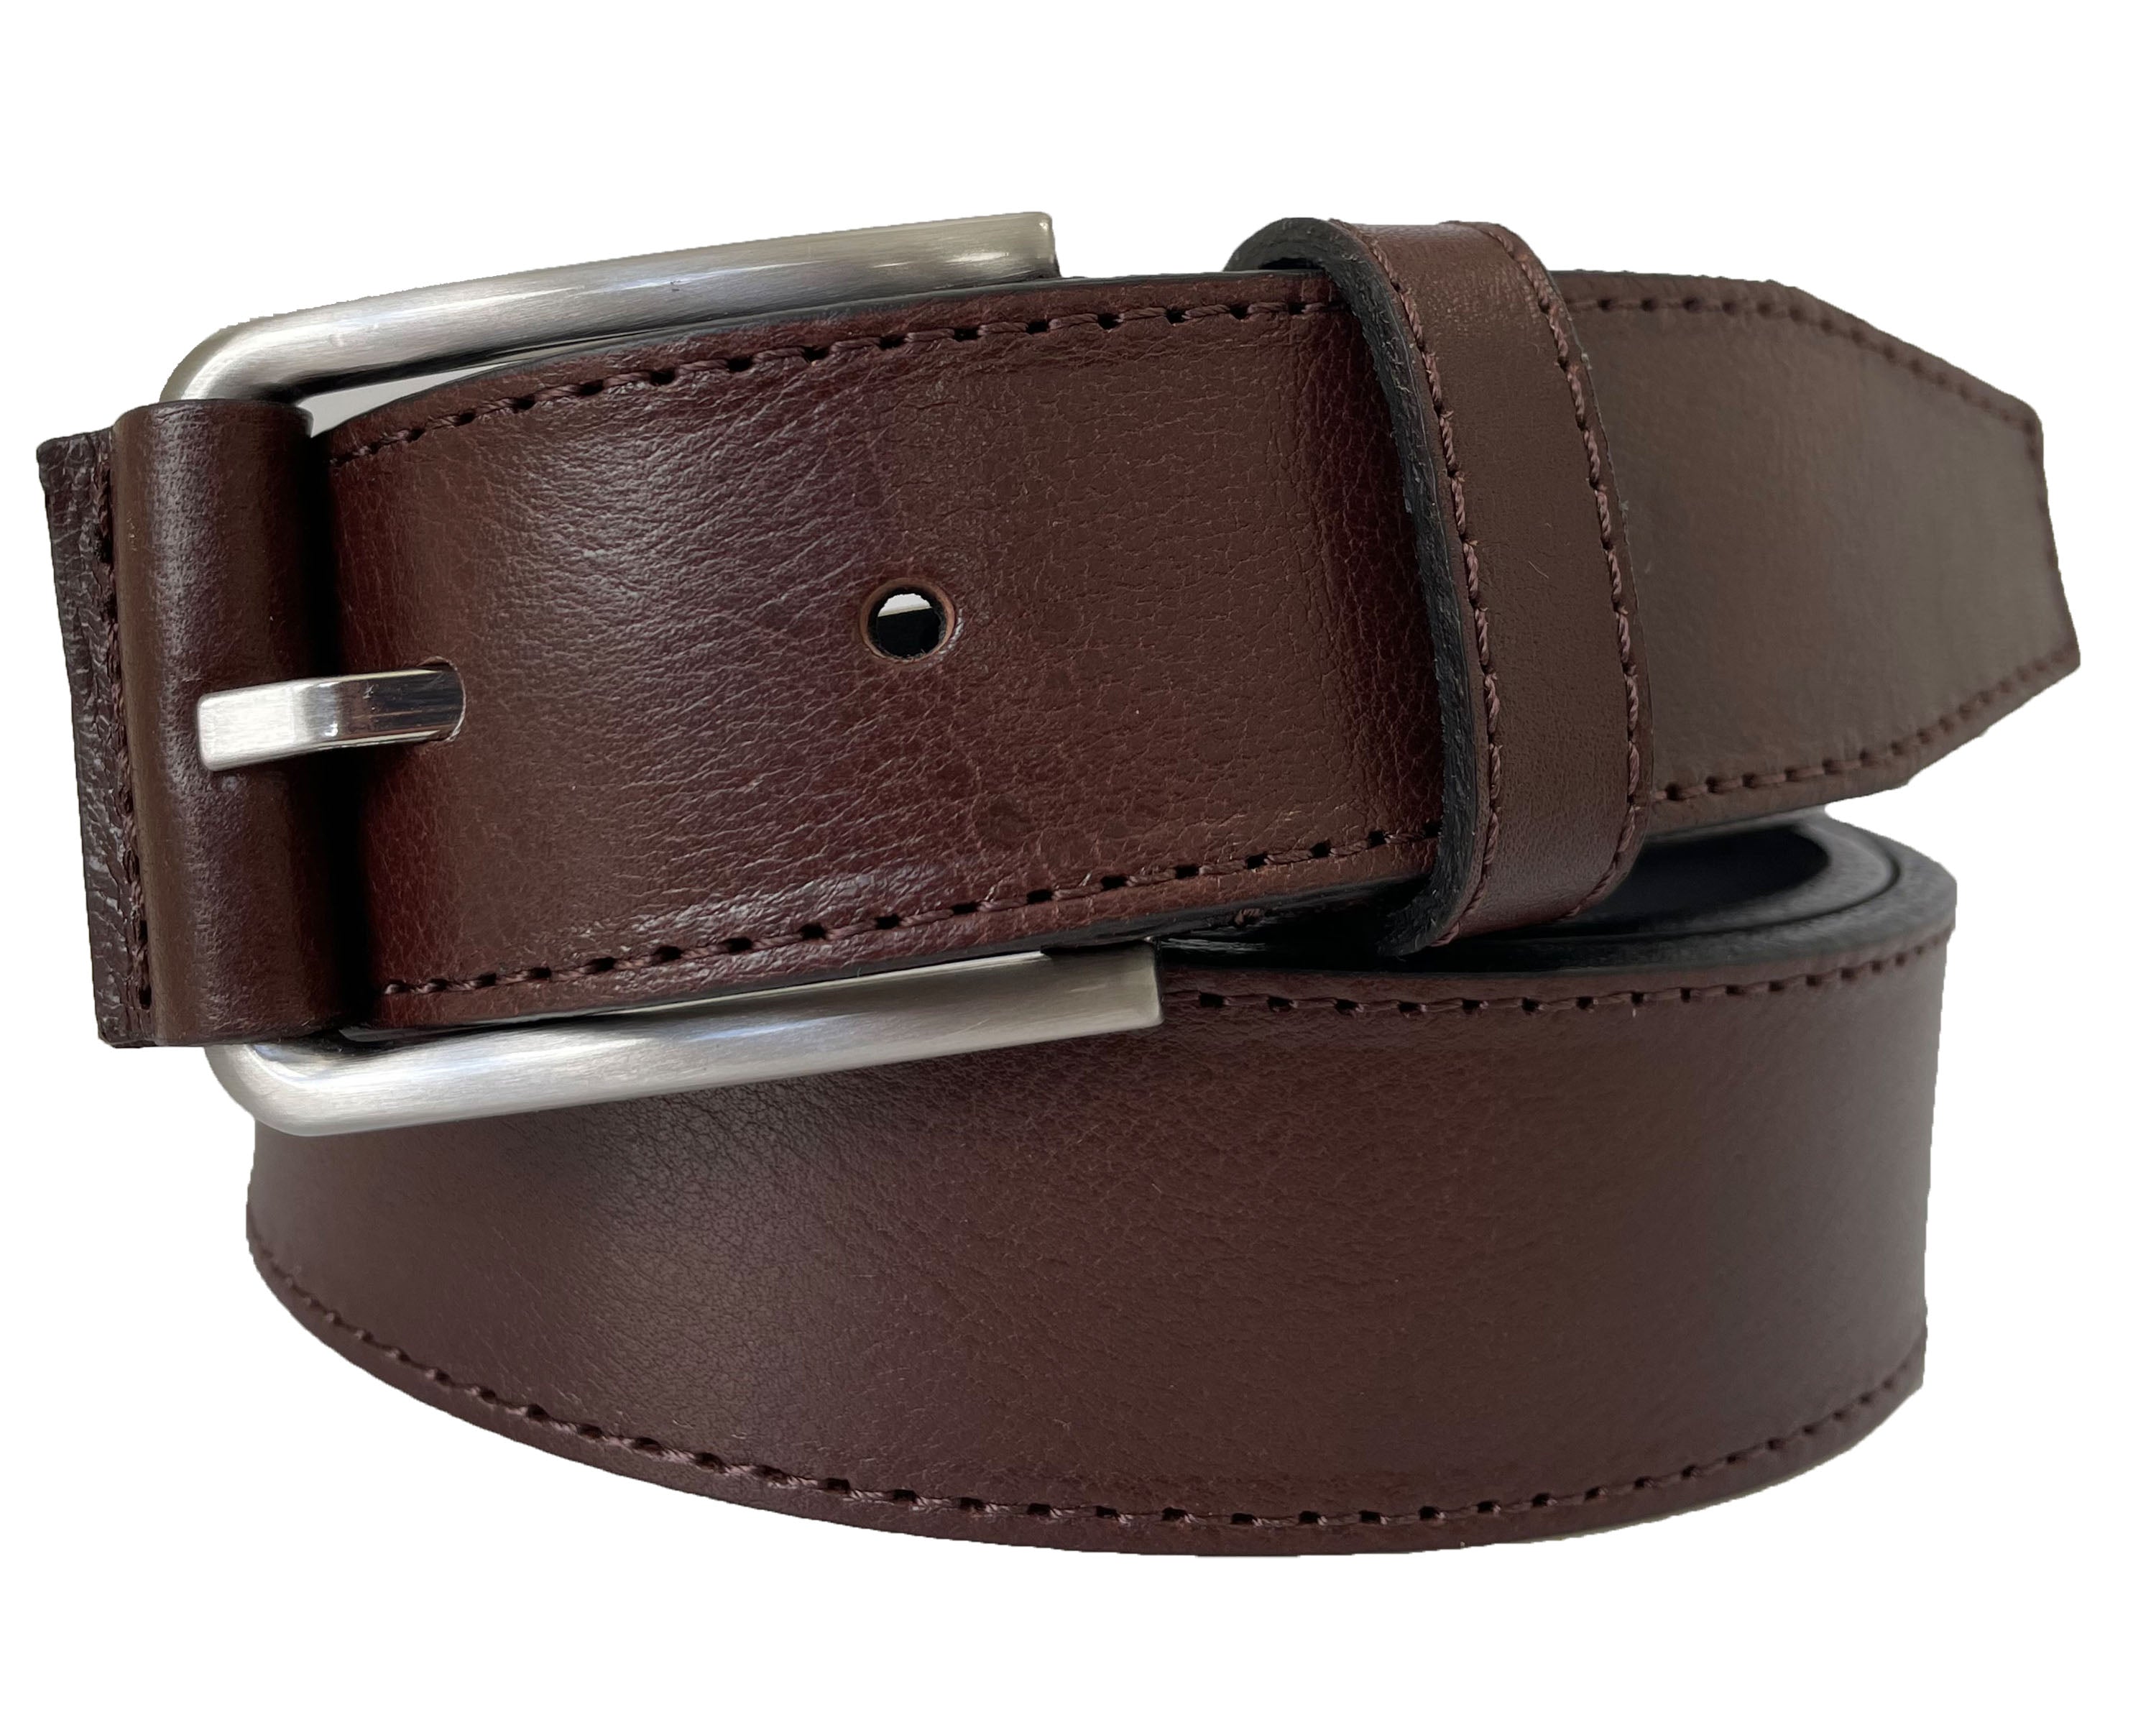 RICH BROWN 35MM CALF LEATHER BELT WITH LEATHER TAB BUCKLE